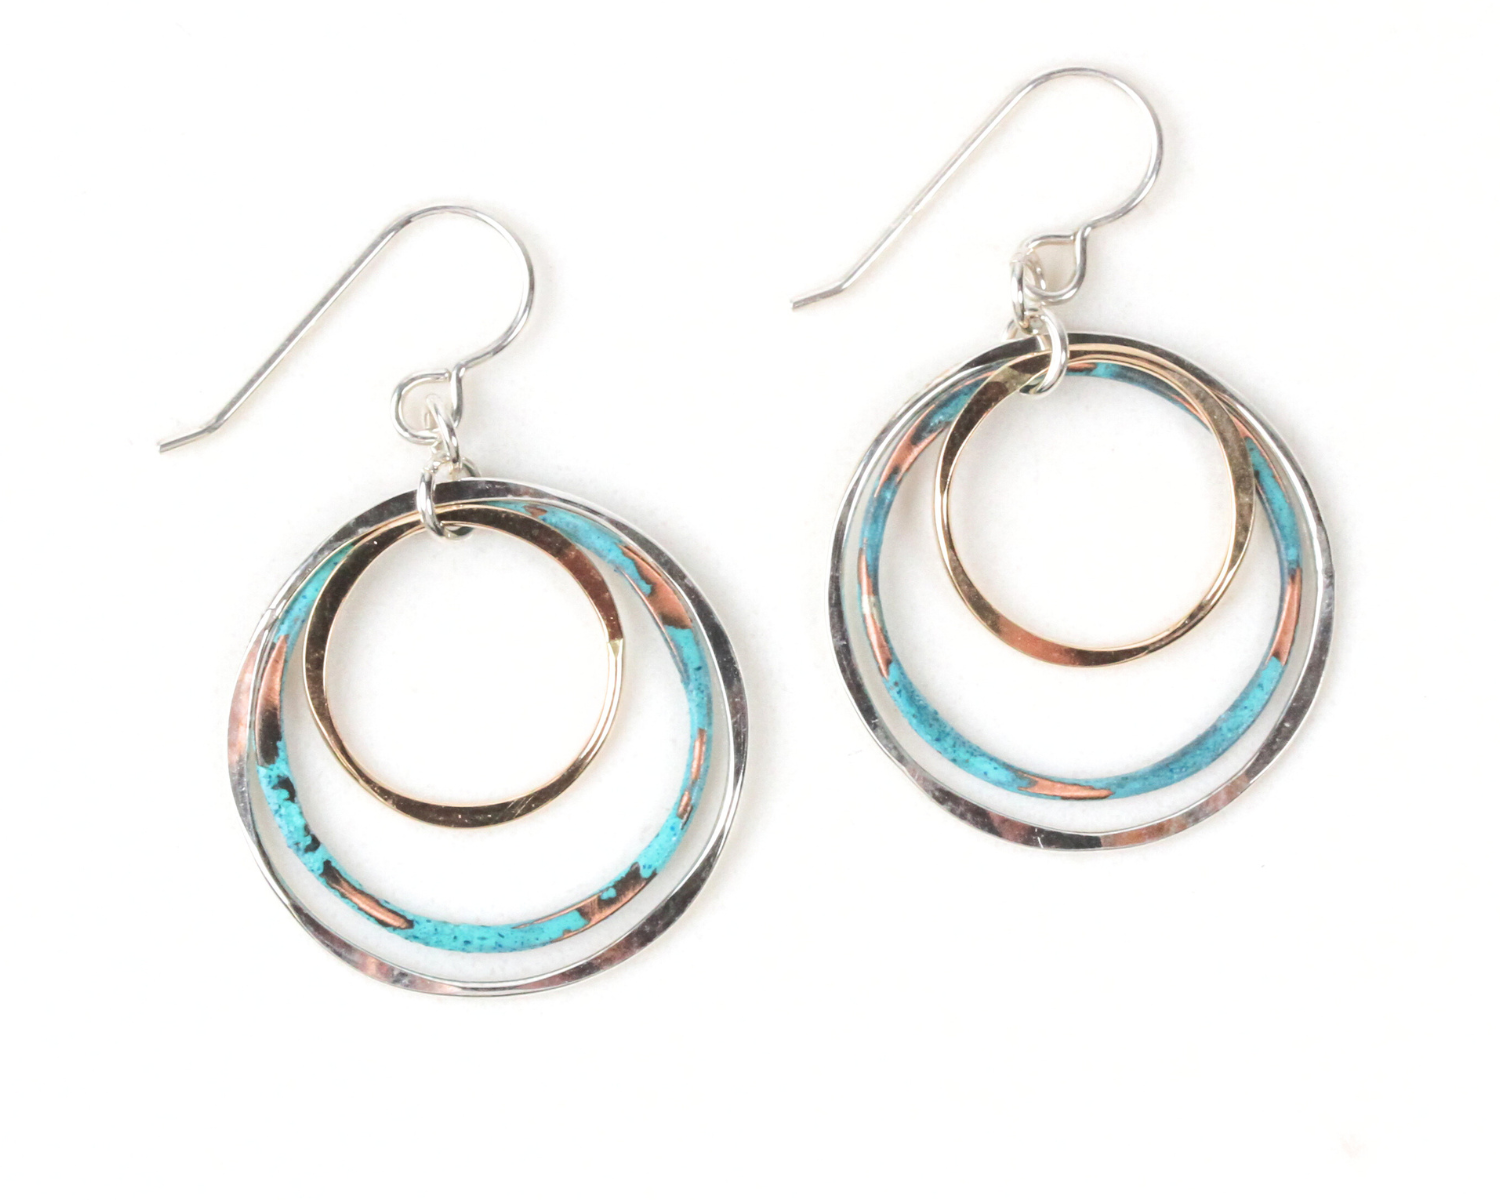 When color, quality, and artistry align, magic happens. These vibrant mixed metal earrings combine lustrous fine metals with a pop of rustic mint color and spin it all together in a delightful dance. Organically shaped hoops make up this three circle earring design. Each is meticulously handcrafted. The largest .925 Sterling Silver hoop measures approximately 1”. Mint patina over Copper and 14 Karat Gold Filled hoops gleam within. Our .925 Sterling Silver ear wires complete these delicate three circle earri